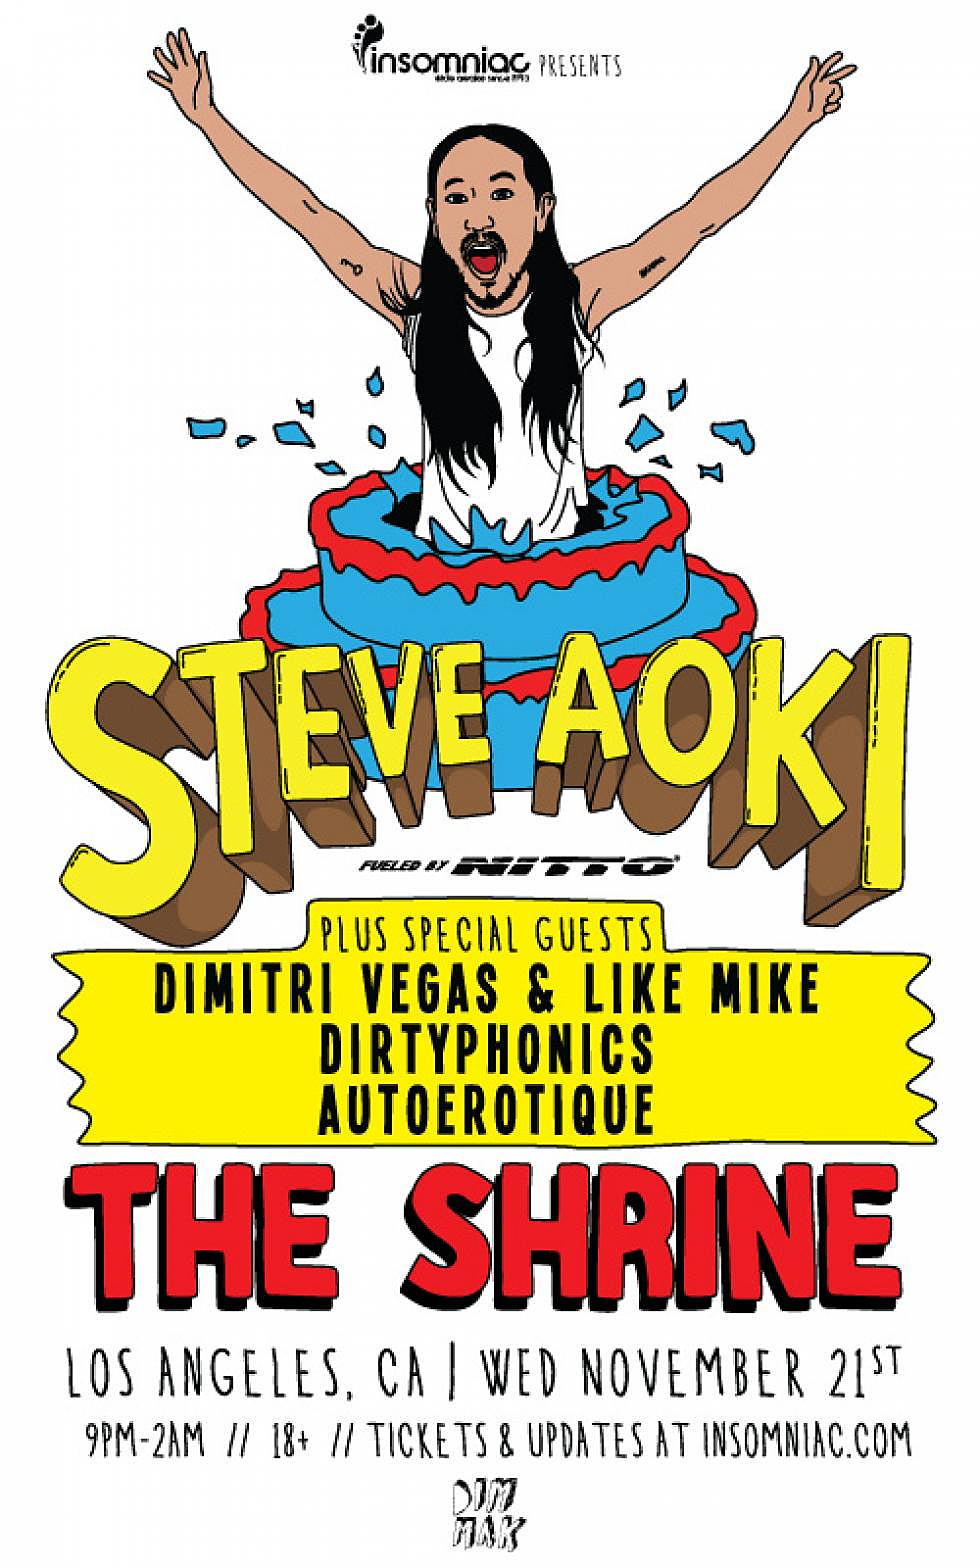 elektro presents: Win tickets to Steve Aoki&#8217;s BIG show in Los Angeles at The Shrine + Prize Pack